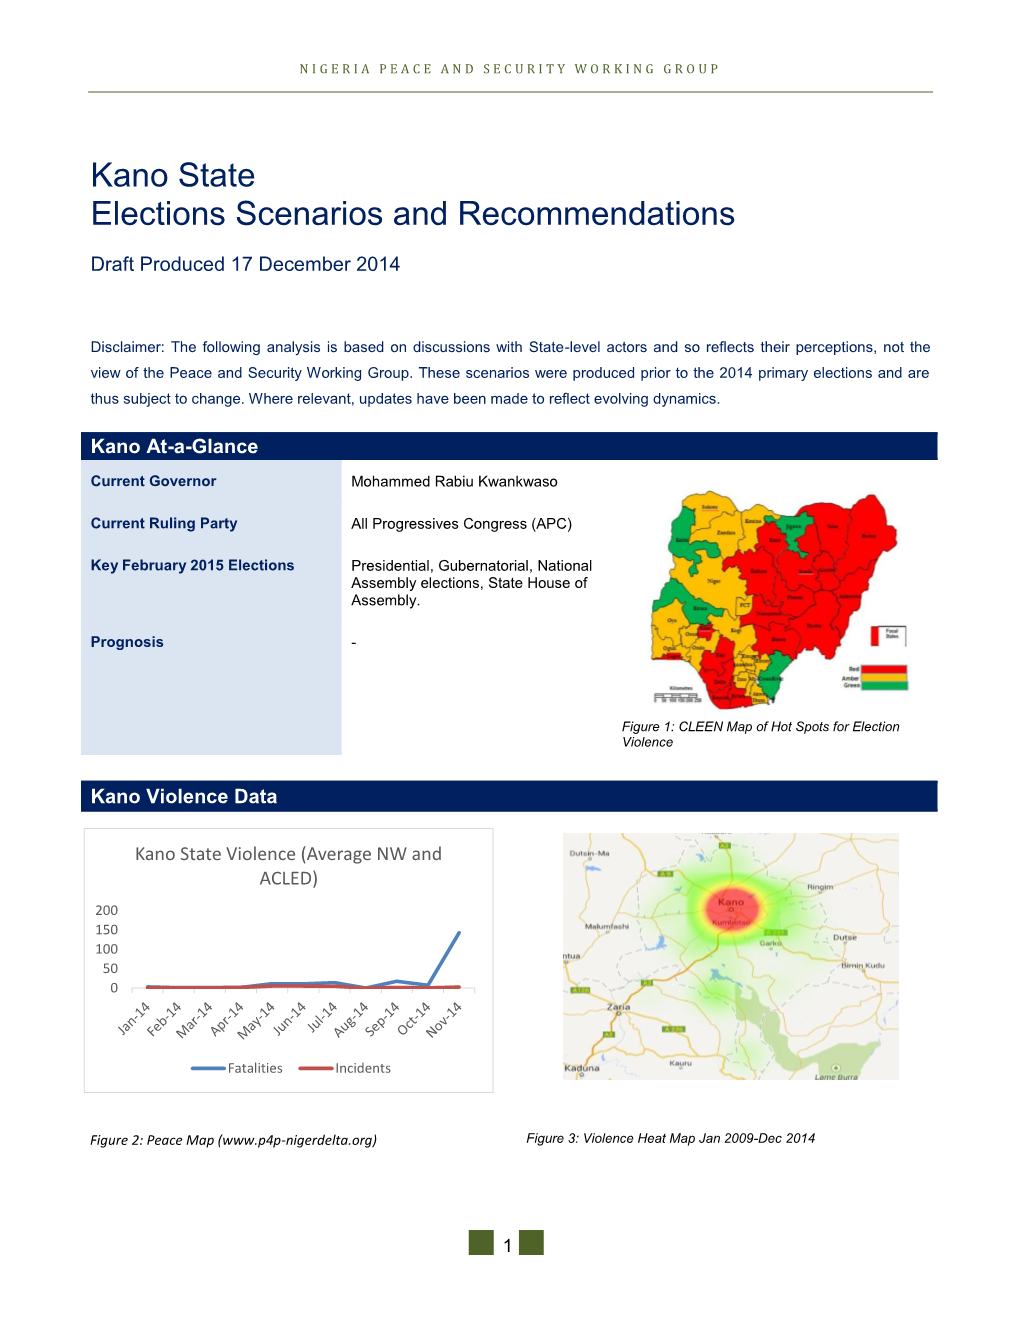 Kano State Elections Scenarios and Recommendations